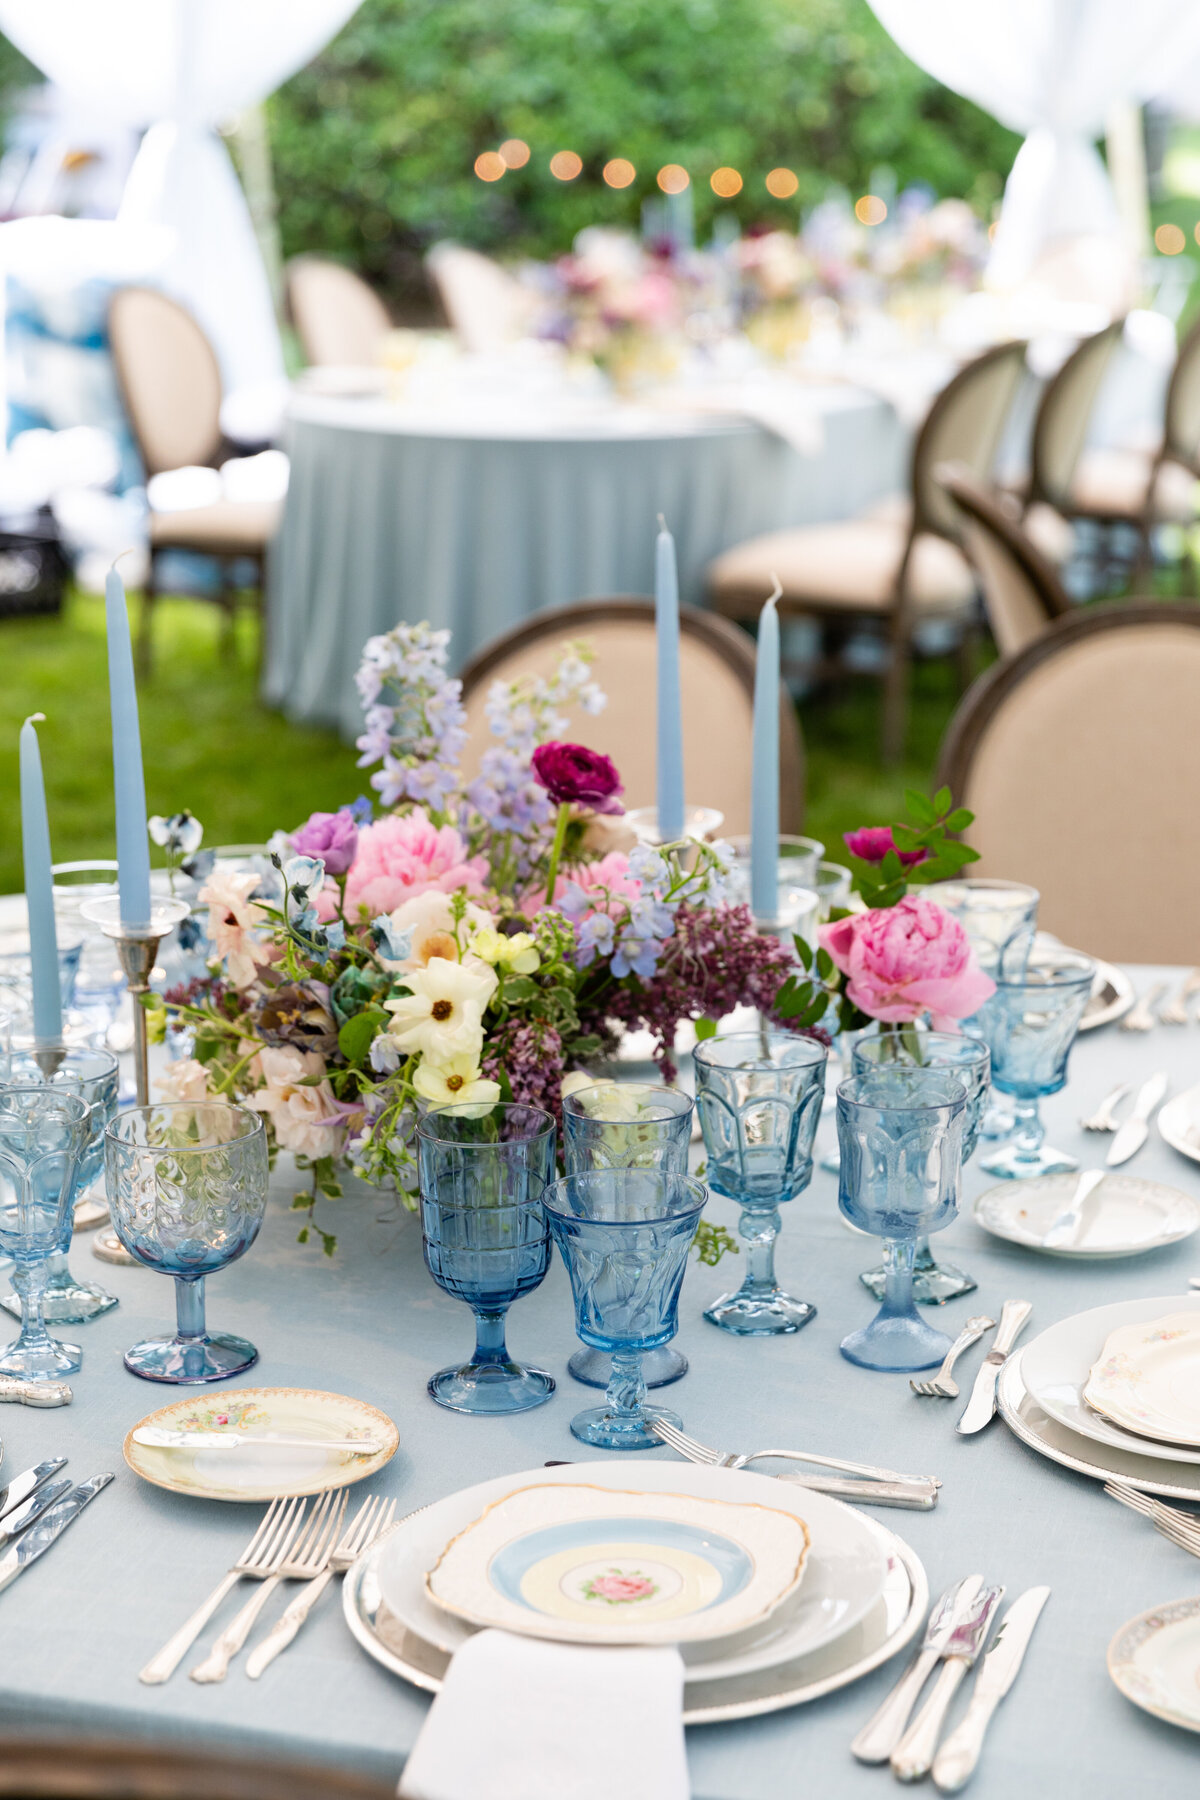 Growing, fresh floral centerpieces with blush garden roses, lilac, blue sweet peas, ranunculus, lavender delphinium, globe allium, and natural greenery for a tented Bridgerton inspired engagement party at a private home in Nashville, TN. Flower by Te